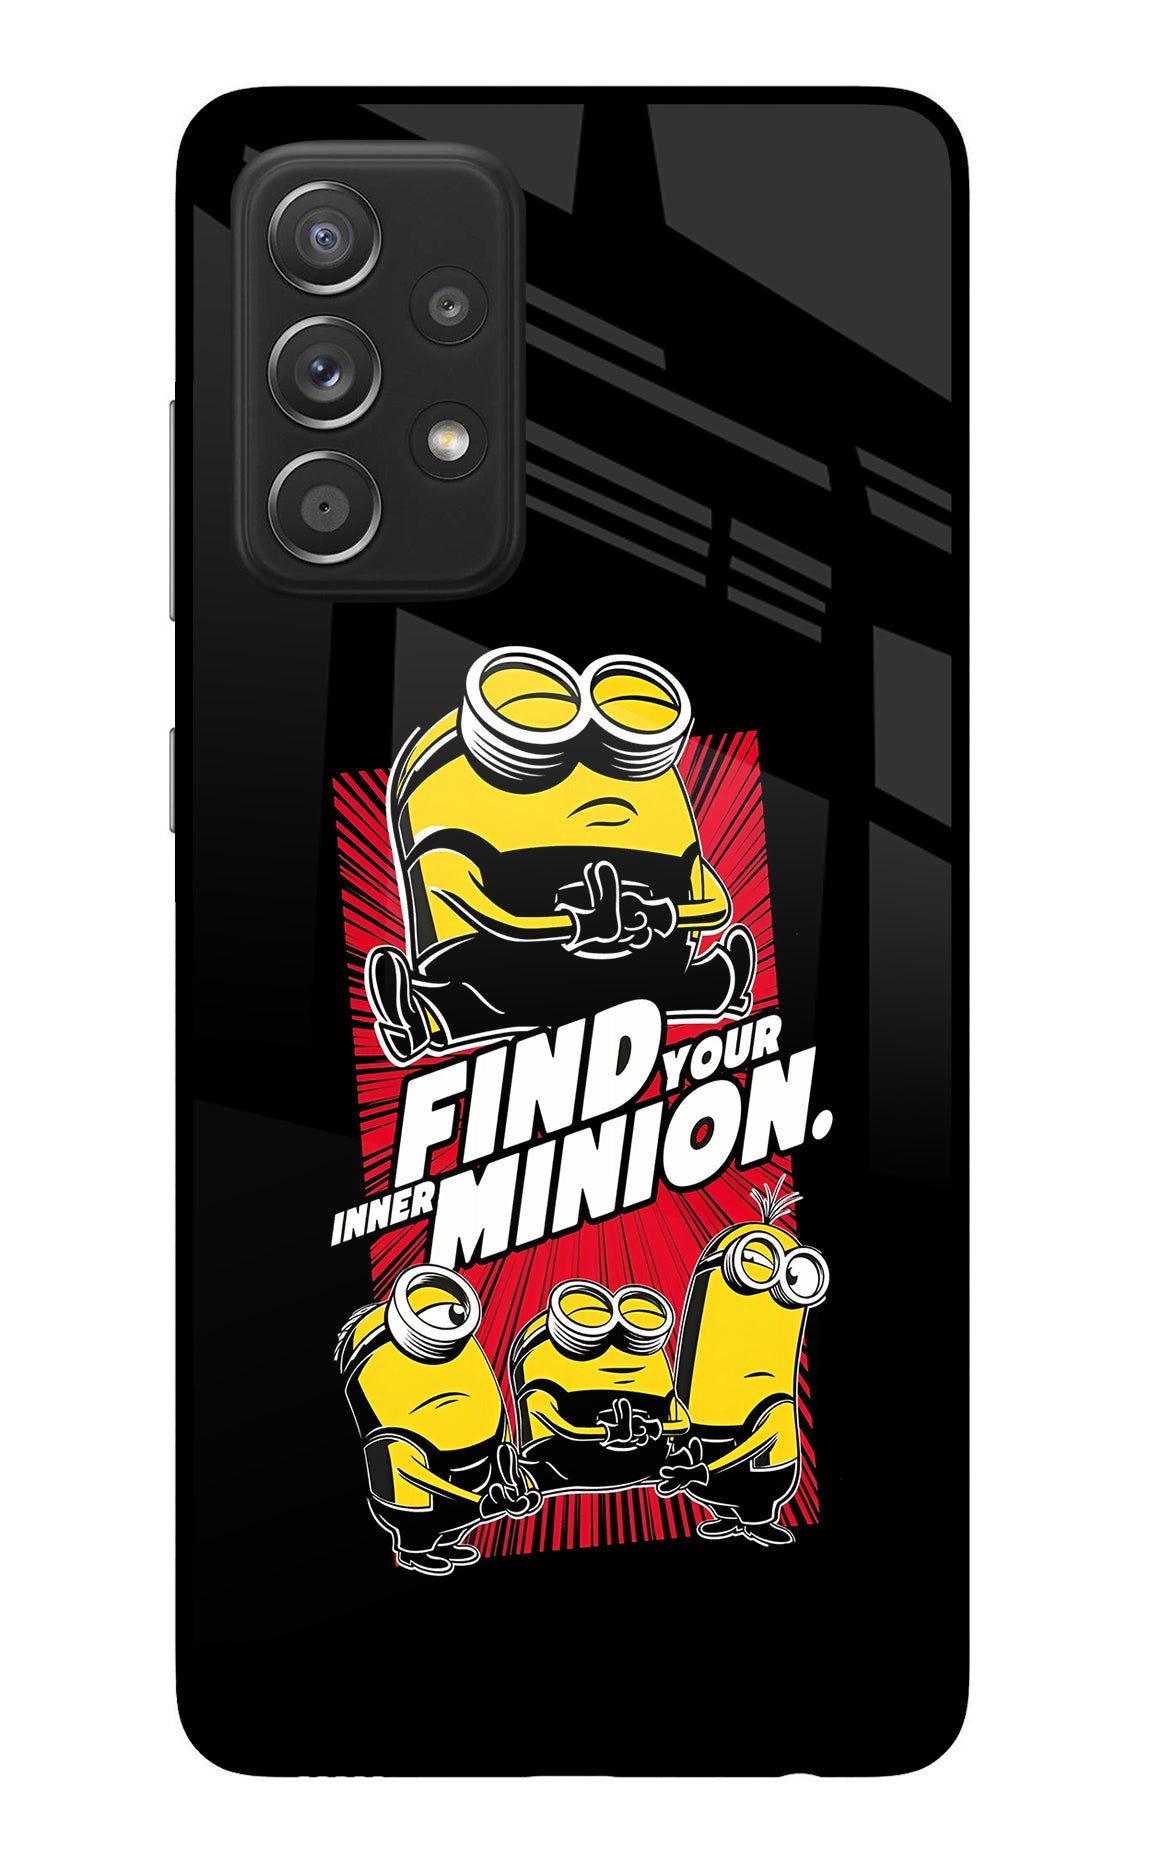 Find your inner Minion Samsung A52/A52s 5G Glass Case